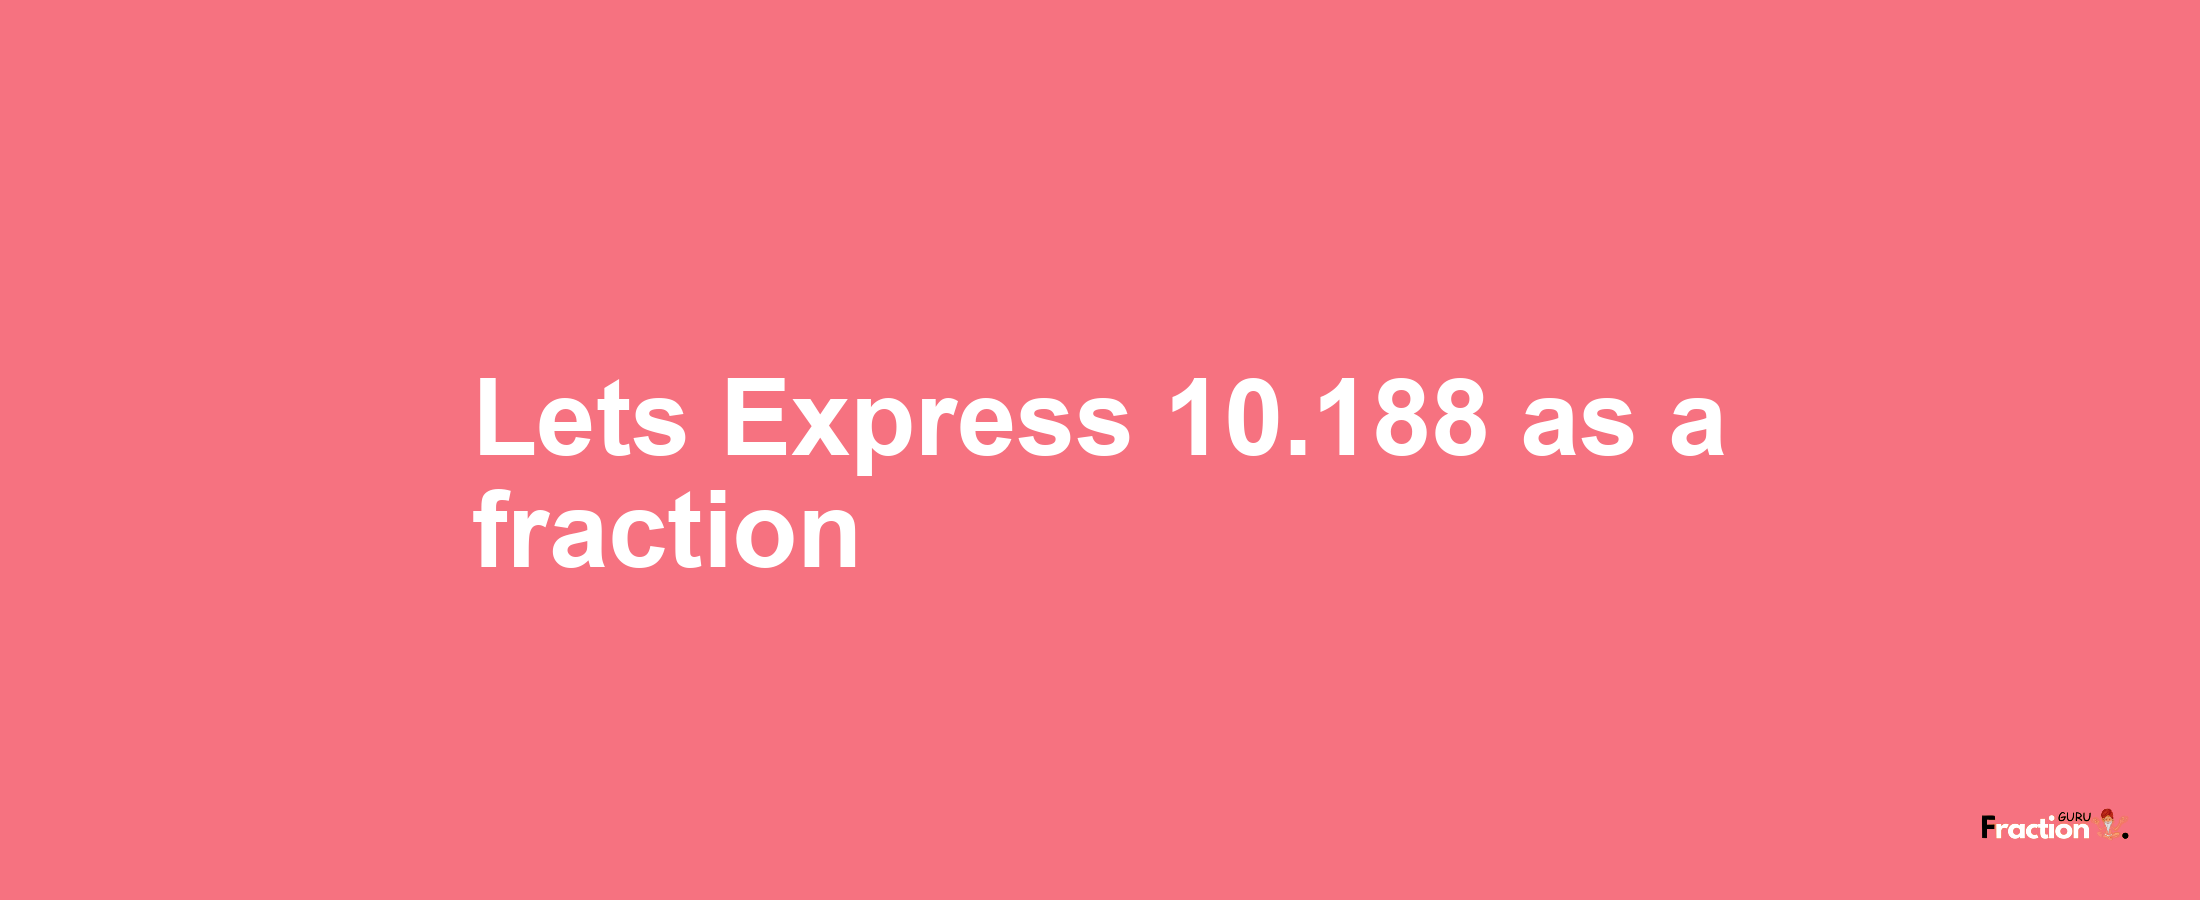 Lets Express 10.188 as afraction